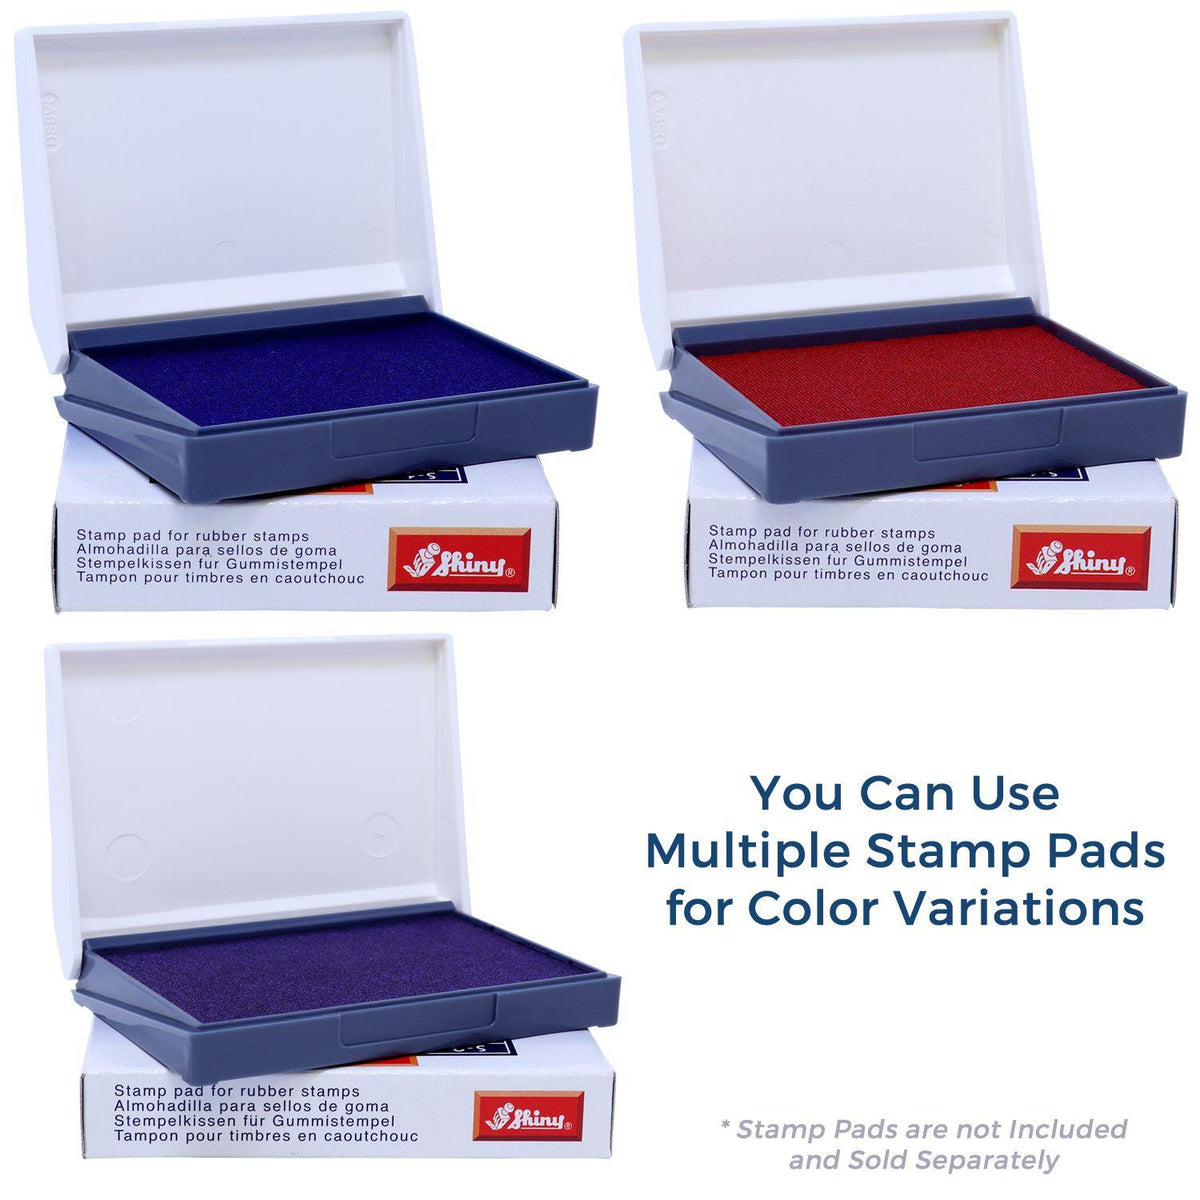 Stamp Pads for Evidence Rubber Stamp Available